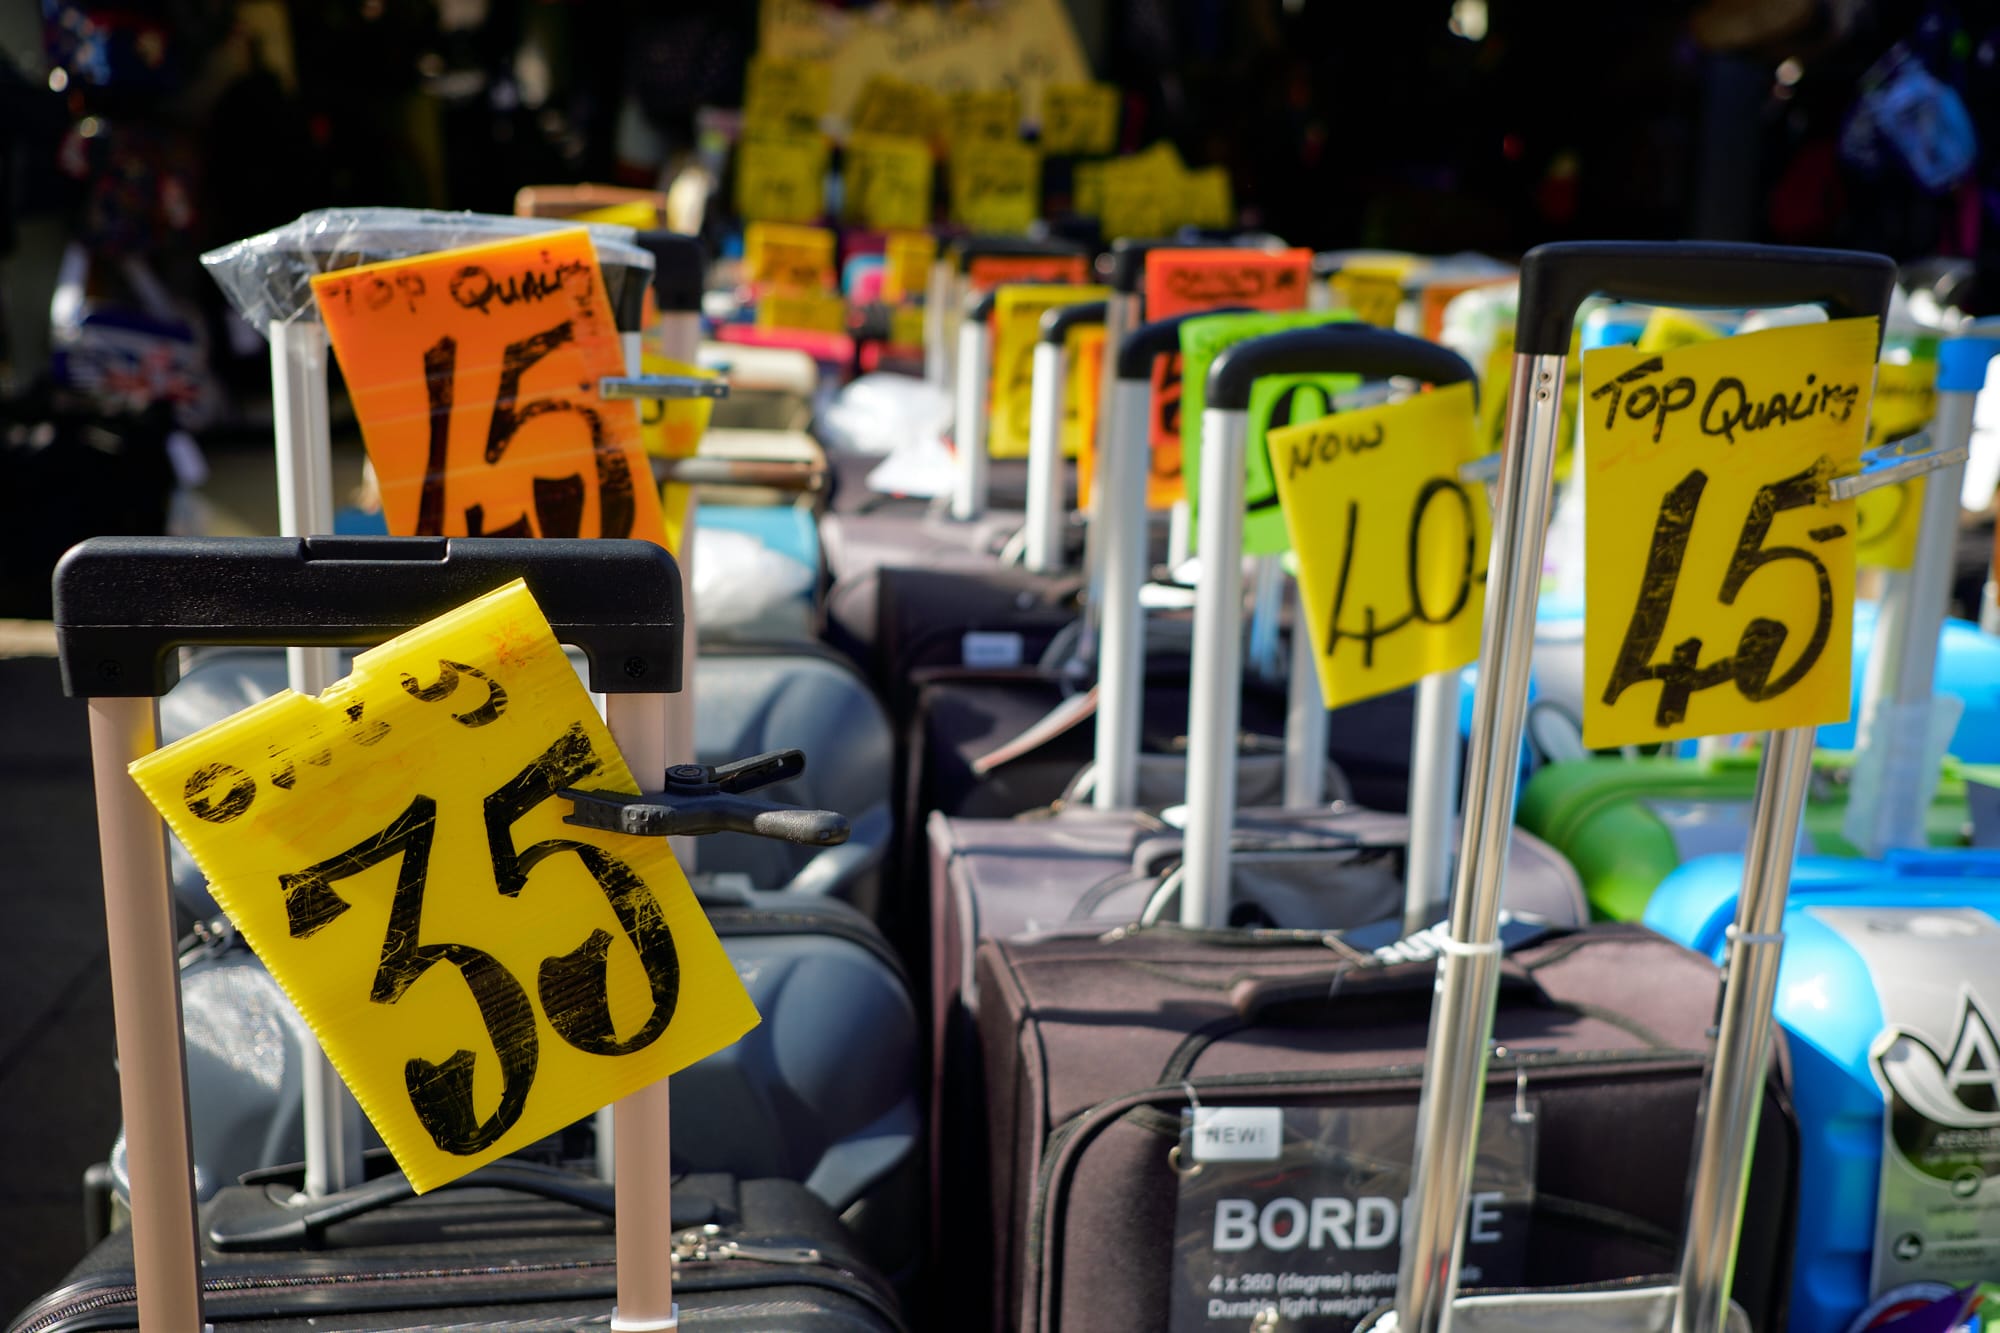 luggage price signs at market